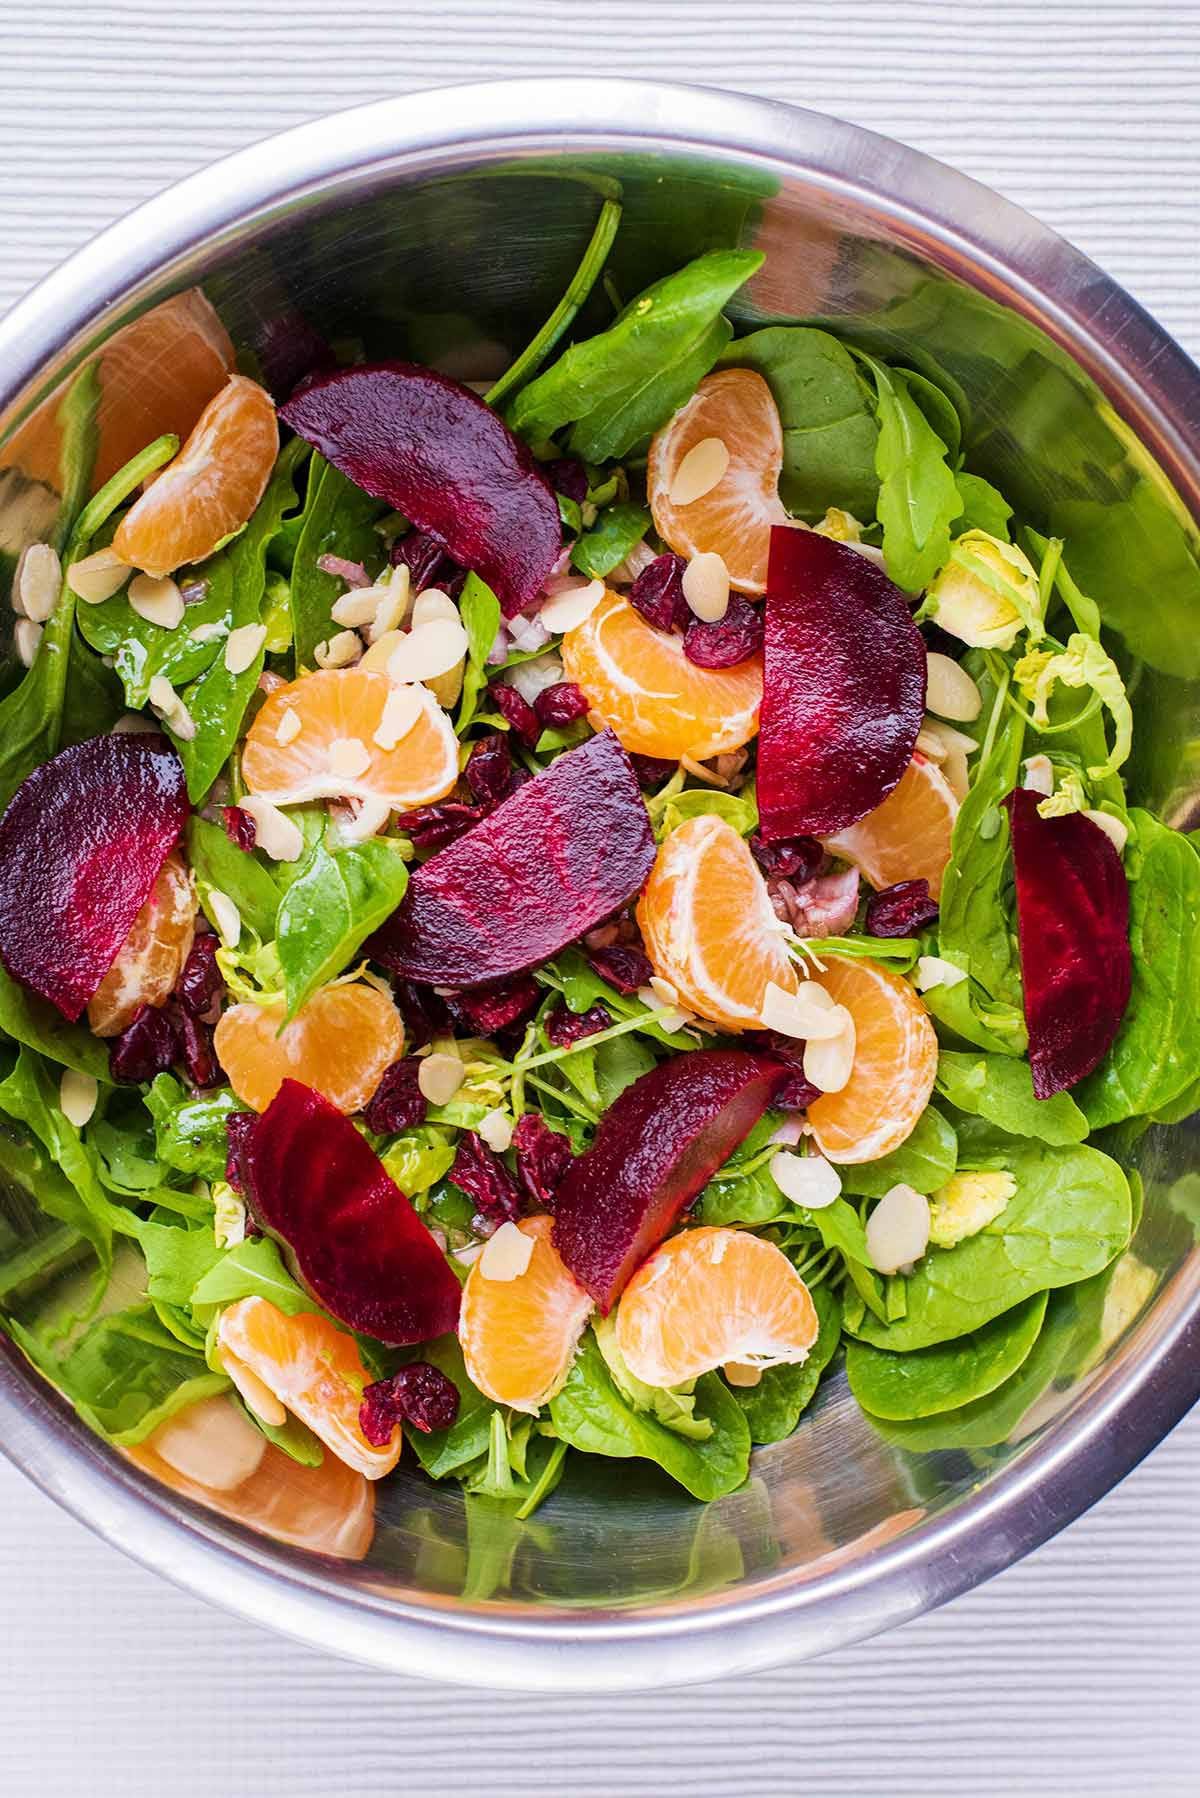 A large metal bowl containing salad leaves, clementine segments and beetroot chunks.